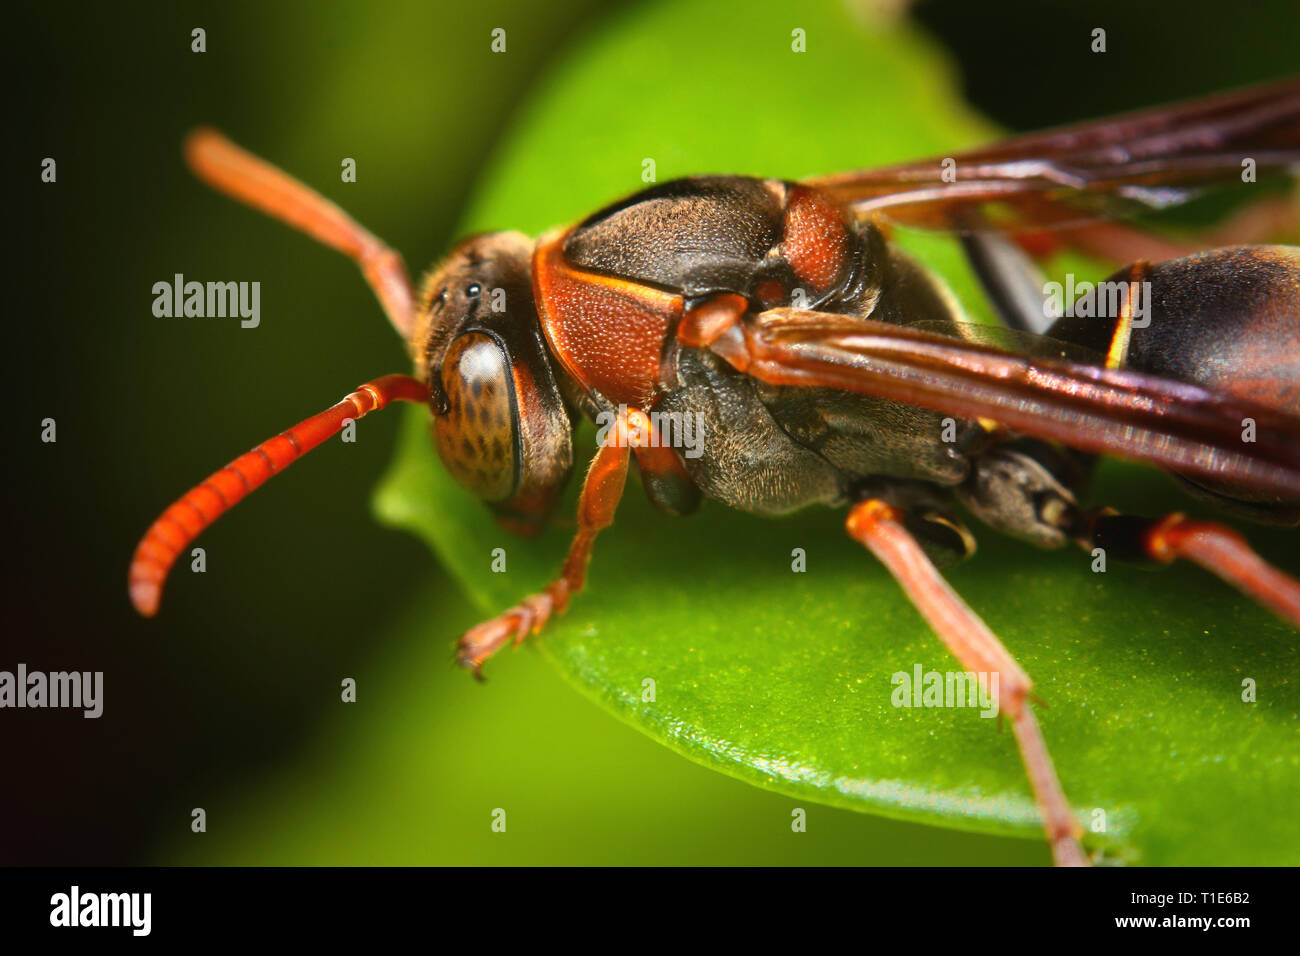 Close up of red wasp outdoors on leaf Stock Photo